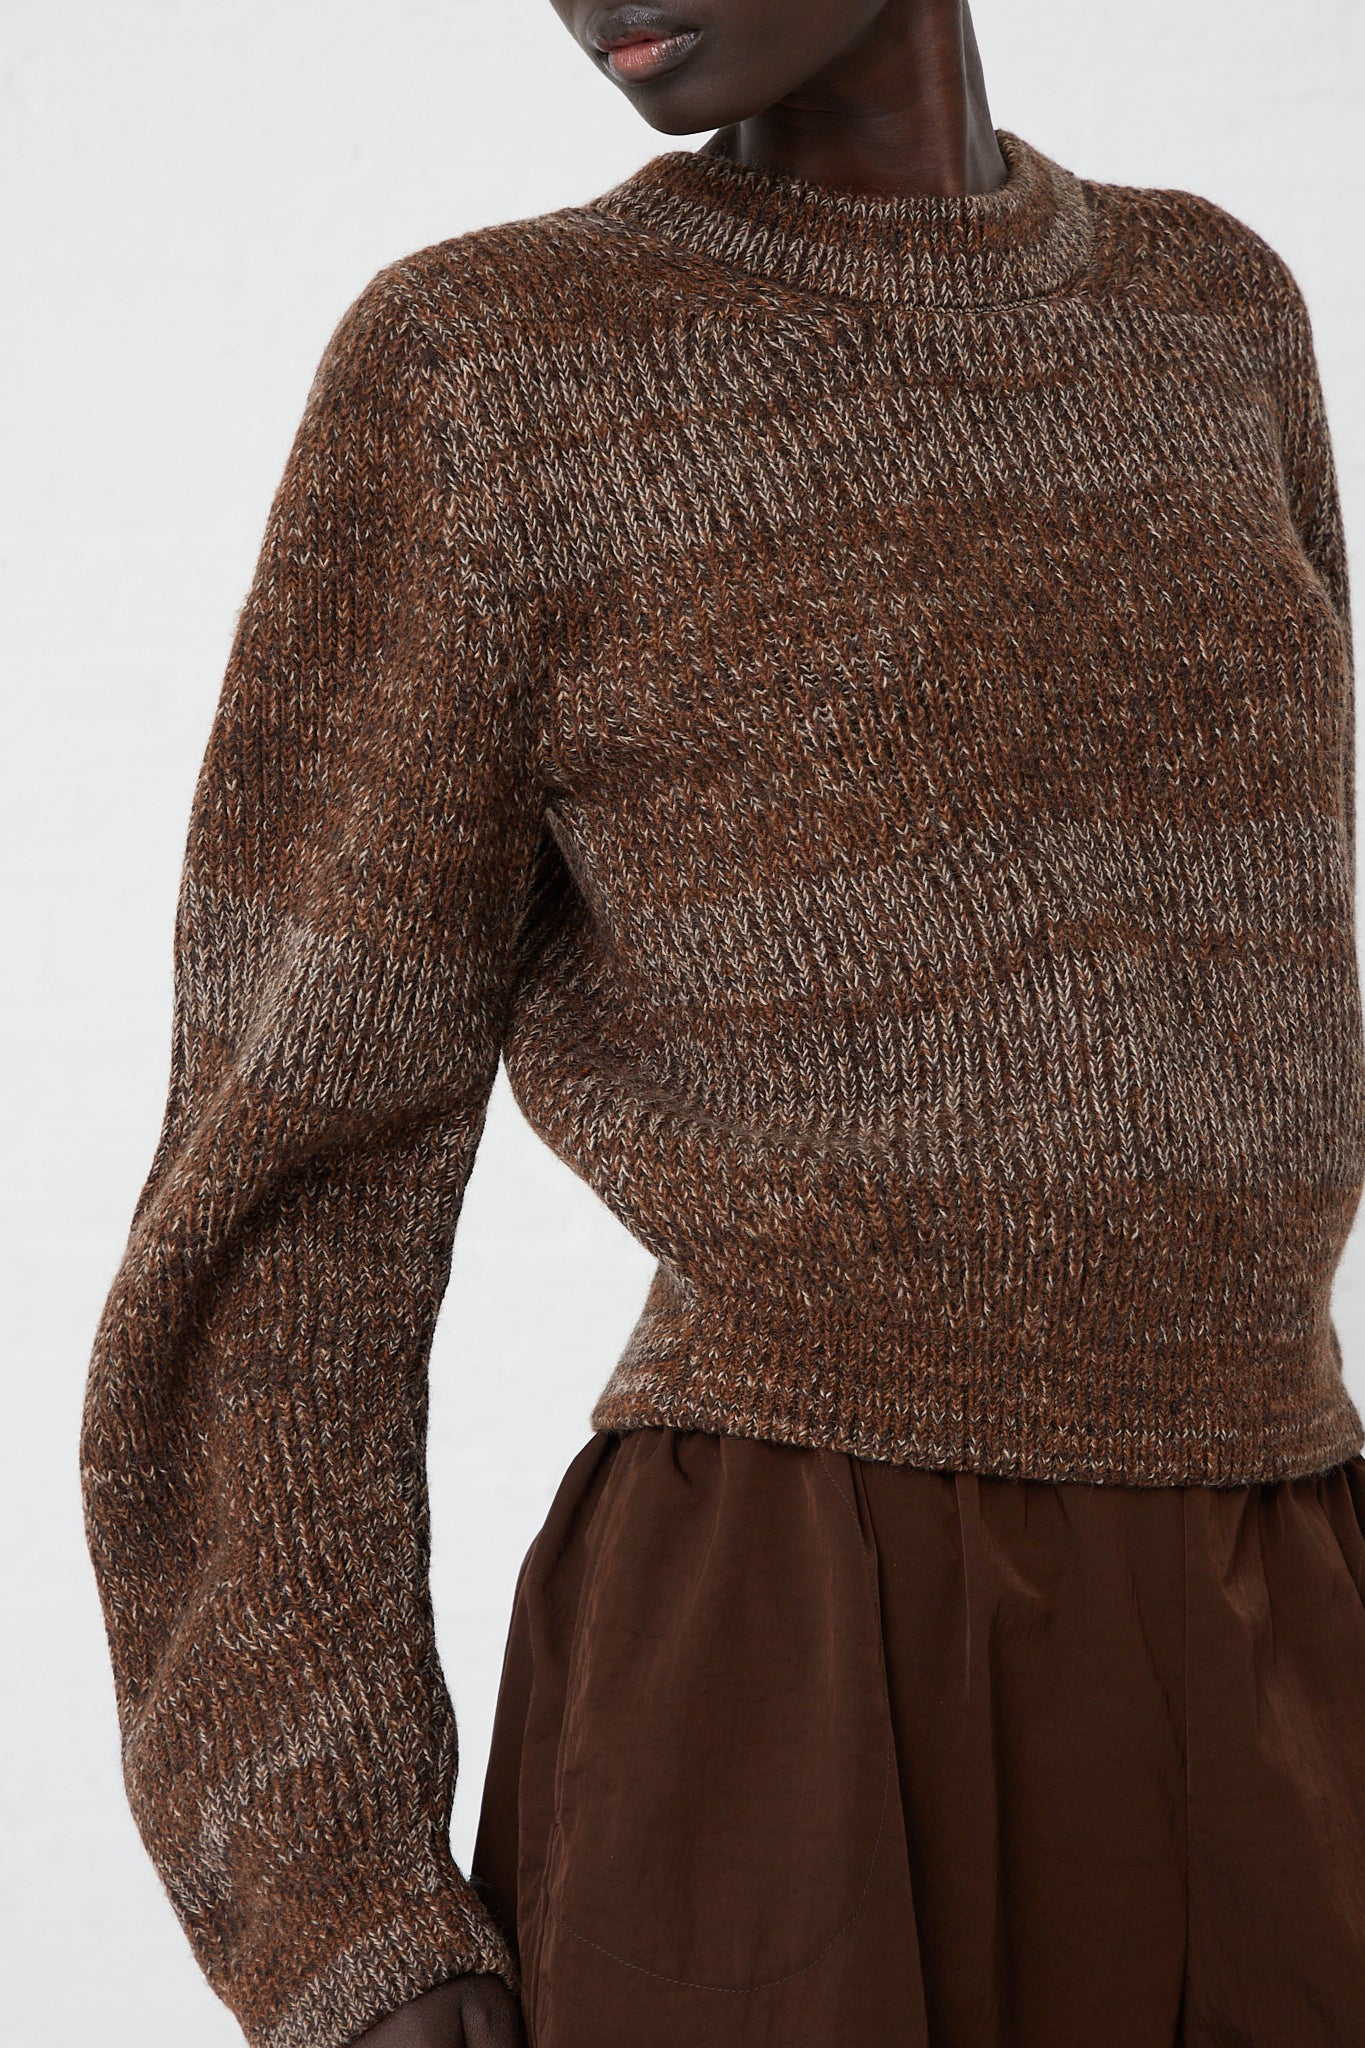 A model wearing a Curved Sleeve Sweater in Oak made by Veronique Leroy.